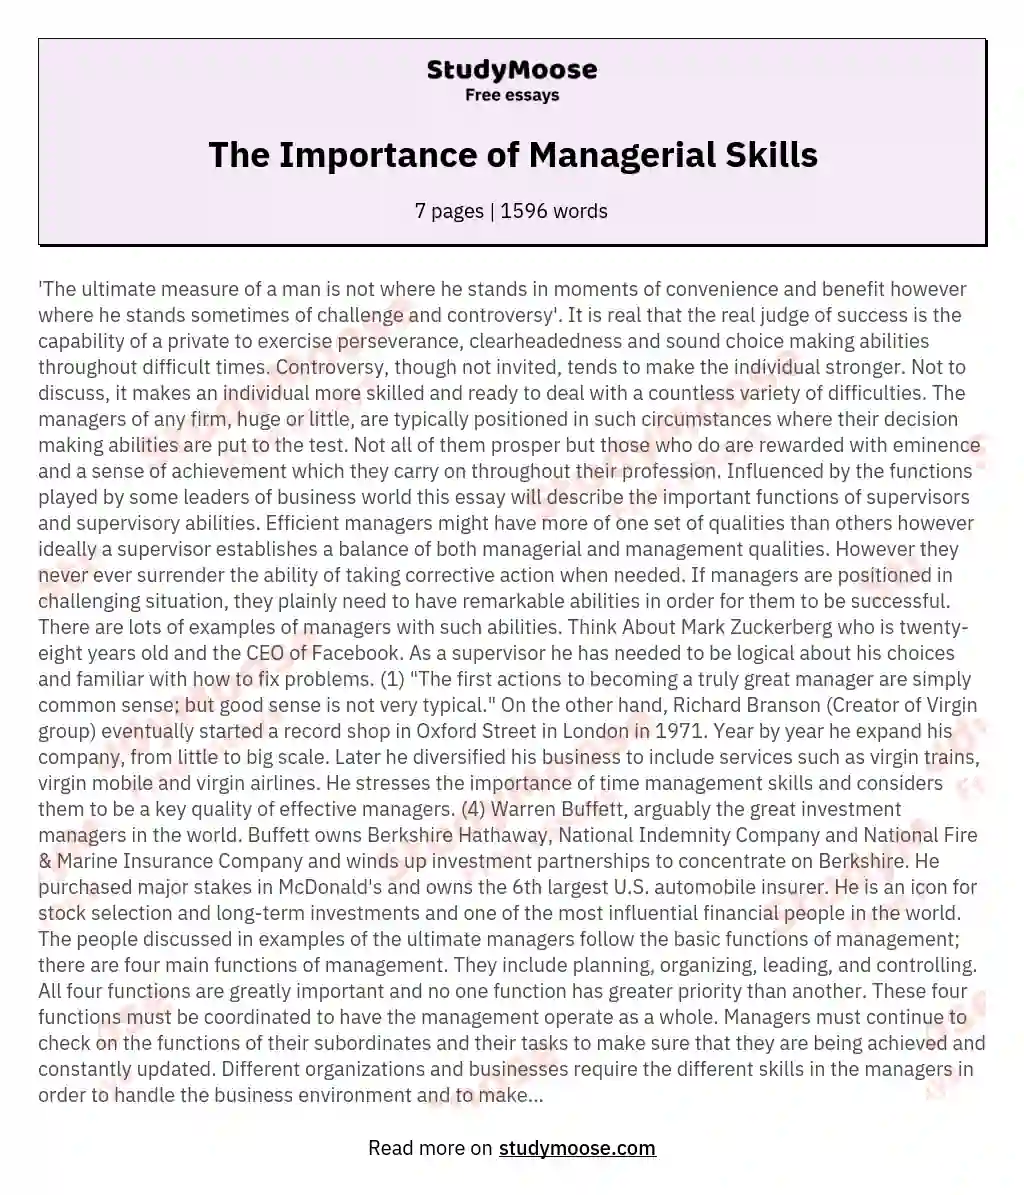 The Importance of Managerial Skills essay